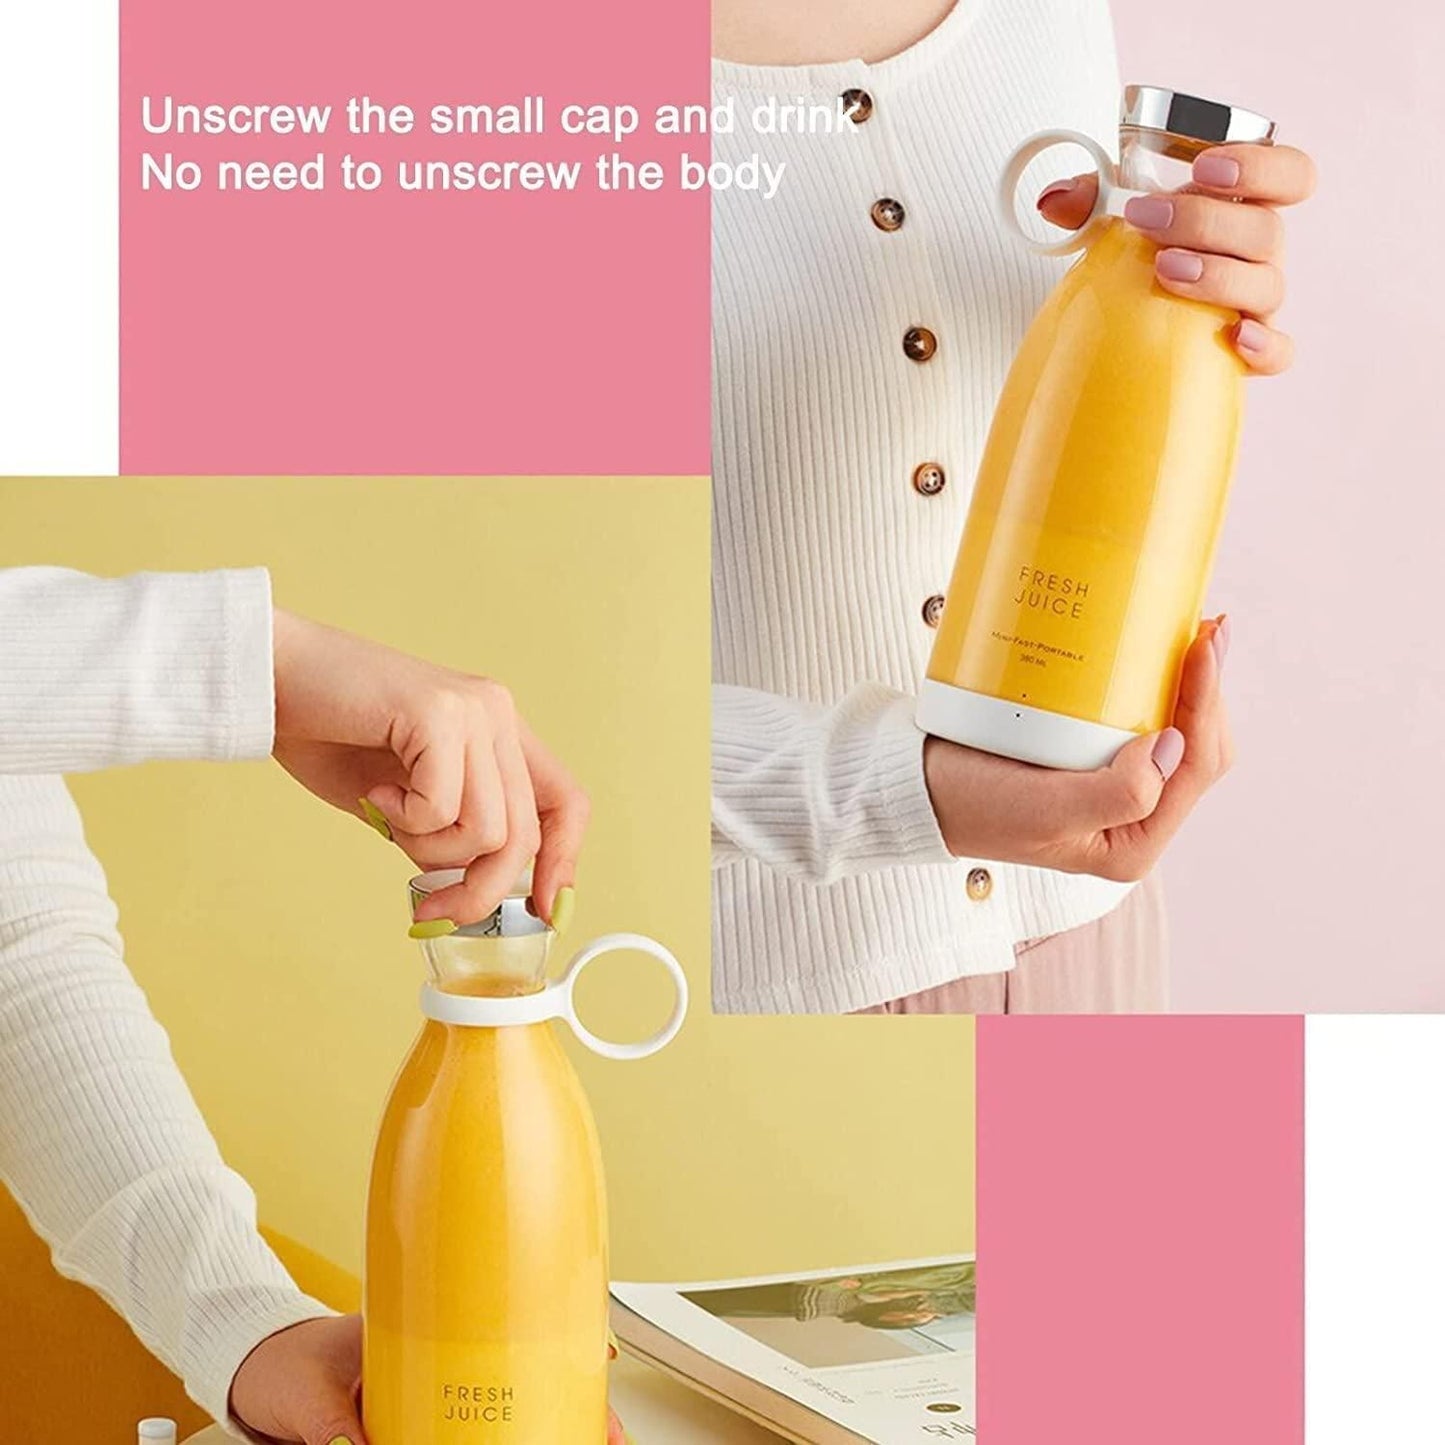 Powerful Electric Portable Mini Juicer Bottle - Elzy Store